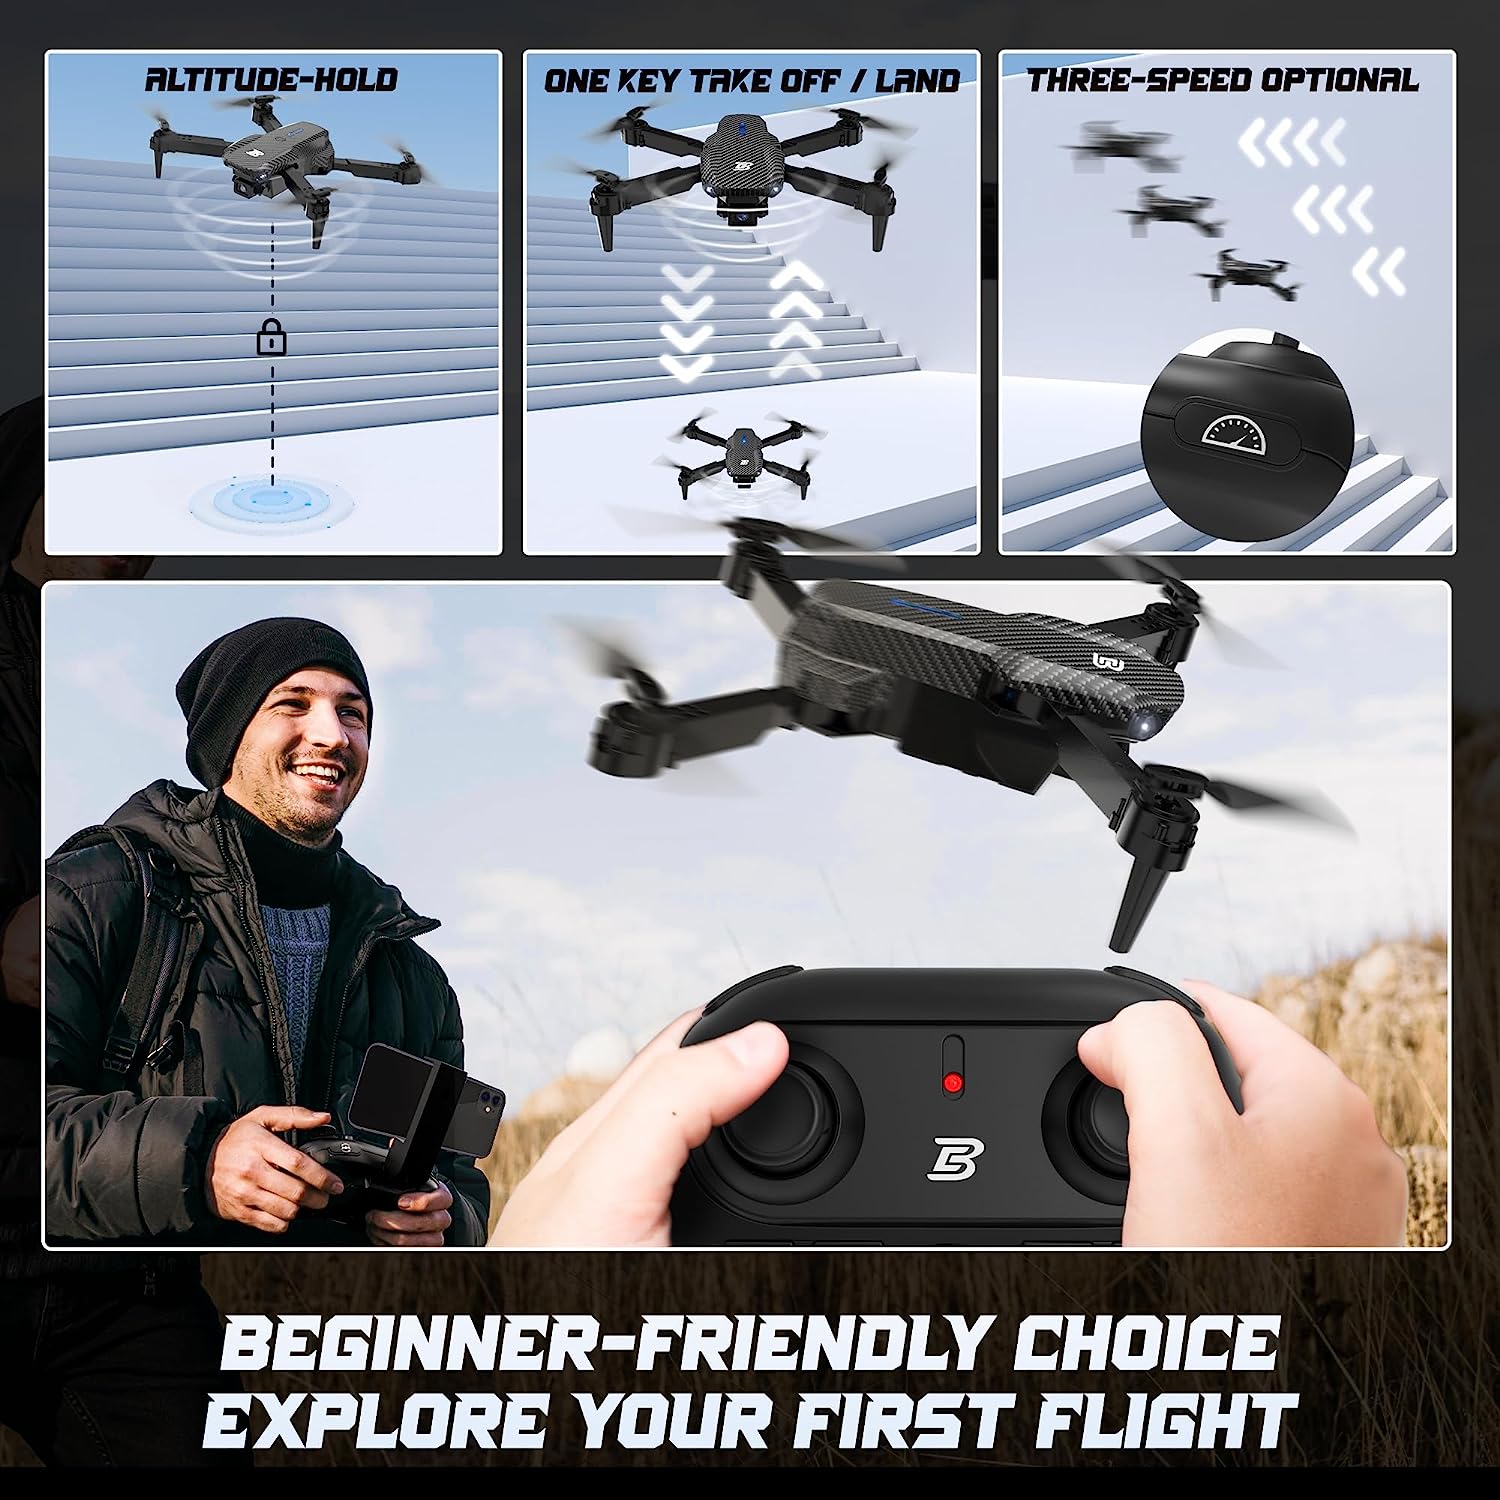 BEZGAR BD101 Drone with 1080P Camera for Adults and Kids - Foldable FPV Remote Control Drone with Gestures Selfie, Auto Hover, One Key Start/Land, 3D Flips, 2 Batteries, Toys Gifts for Boys Girls